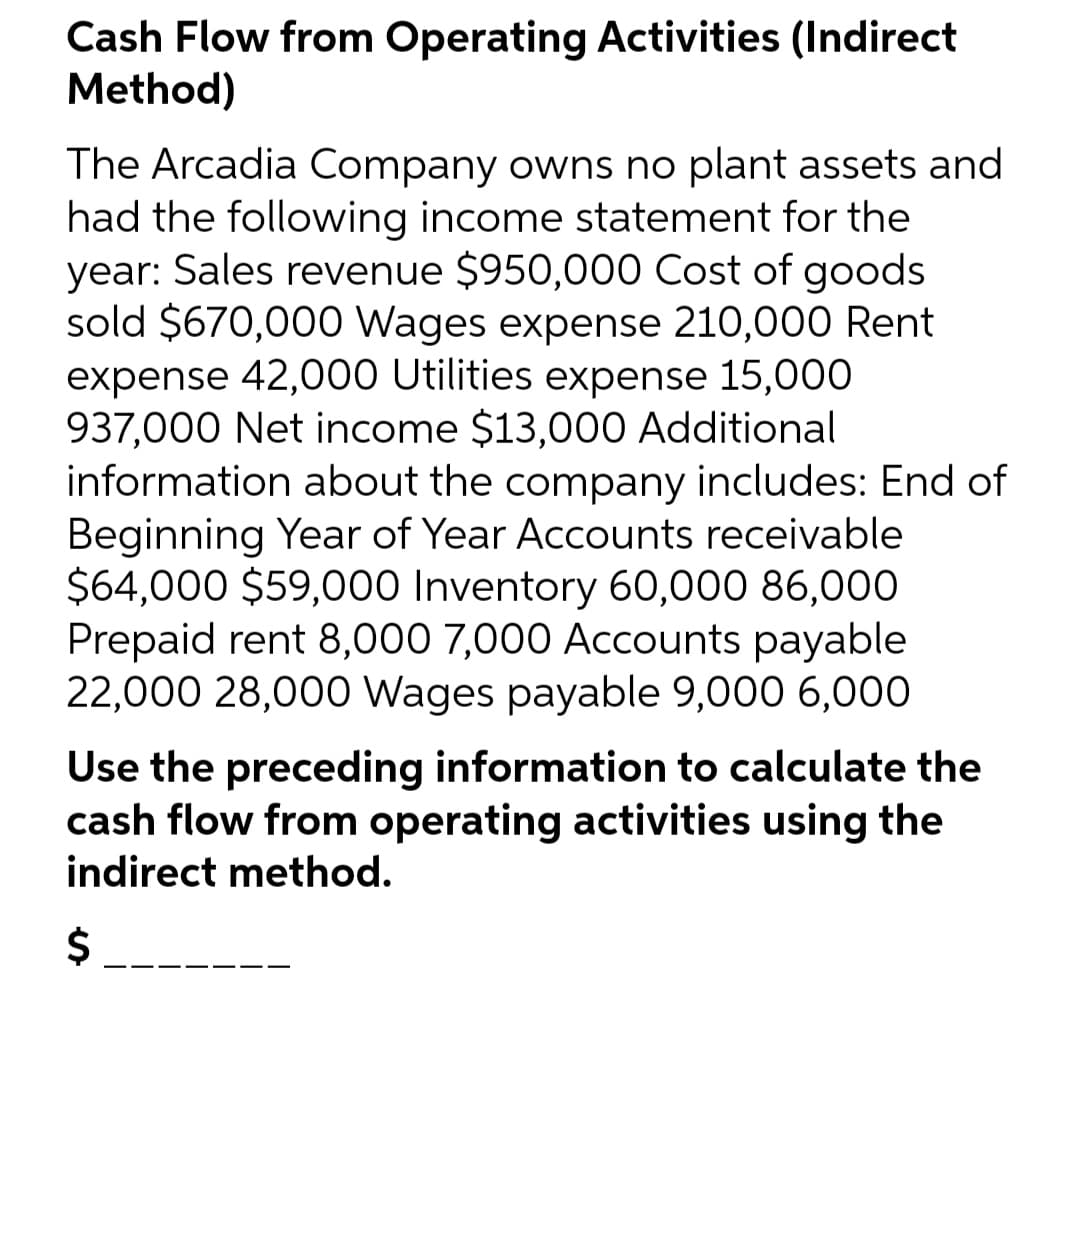 Cash Flow from Operating Activities (Indirect
Method)
The Arcadia Company owns no plant assets and
had the following income statement for the
year: Sales revenue $950,000 Cost of goods
sold $670,000 Wages expense 210,000 Rent
expense 42,000 Utilities expense 15,000
937,000 Net income $13,000 Additional
information about the company includes: End of
Beginning Year of Year Accounts receivable
$64,000 $59,000 Inventory 60,000 86,000
Prepaid rent 8,000 7,000 Accounts payable
22,000 28,000 Wages payable 9,000 6,000
Use the preceding information to calculate the
cash flow from operating activities using the
indirect method.
$